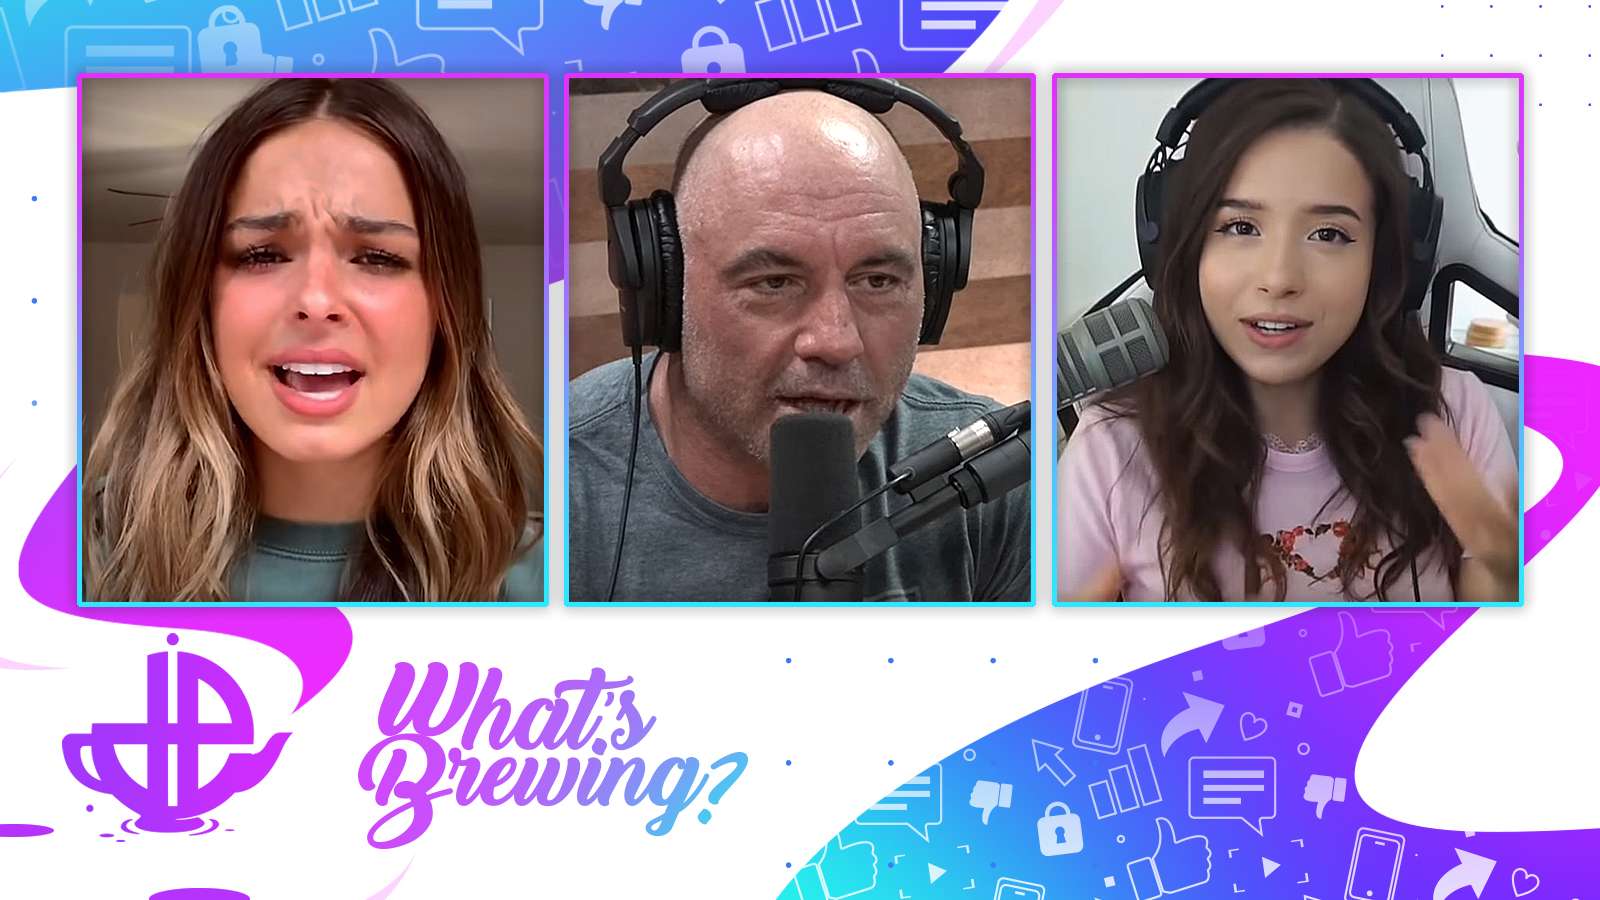 Joe Rogan, Addison Rae, and Pokimane are shown on the What's Brewing logo.